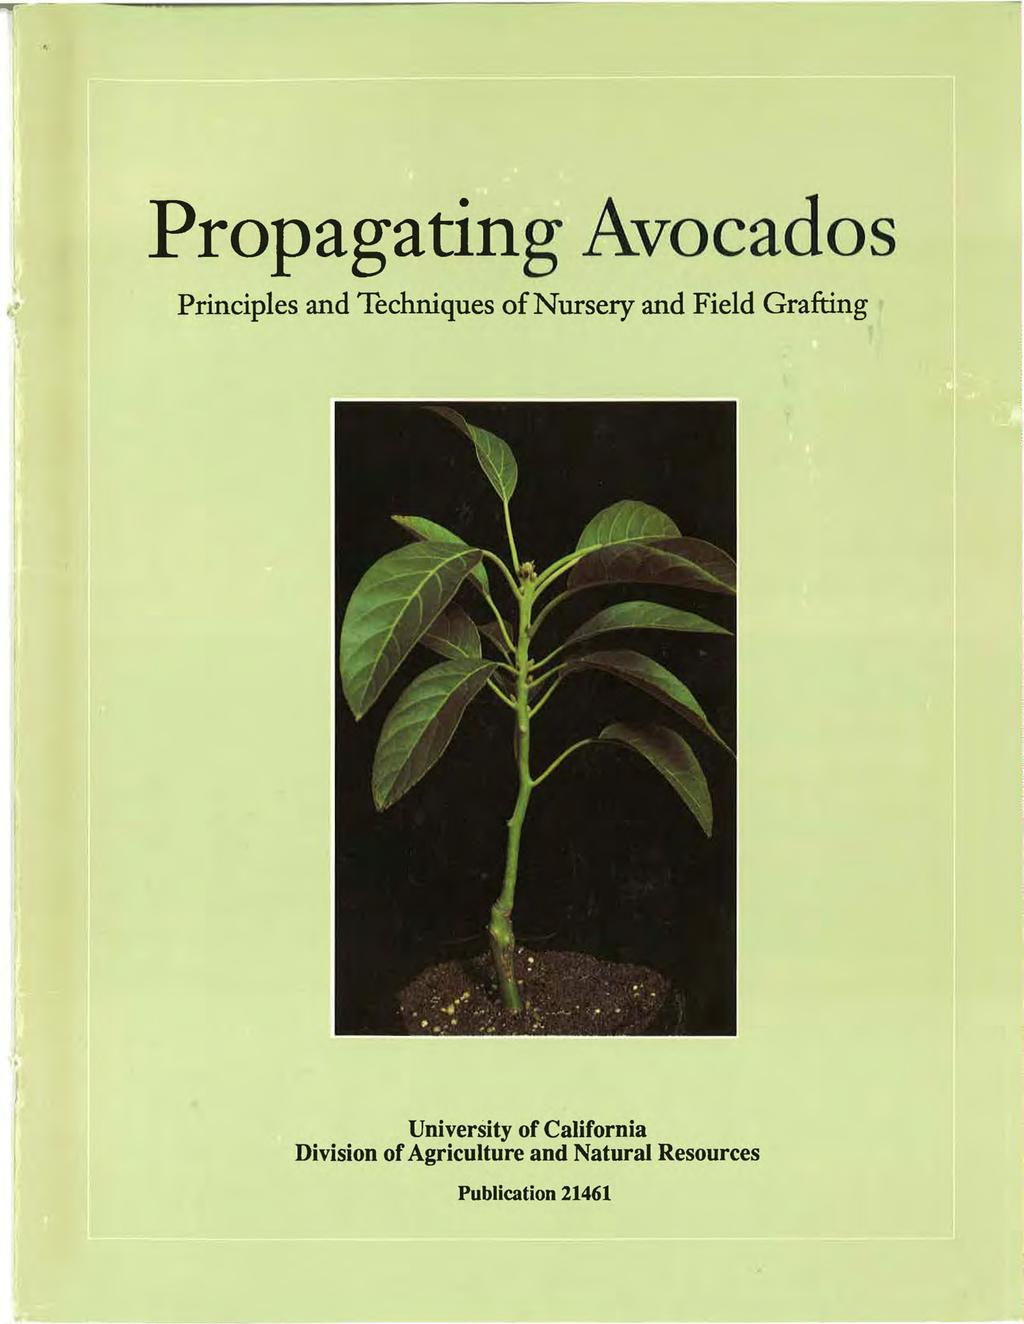 Propagating Avocados Principles and Techniques of Nursery and Field Grafting